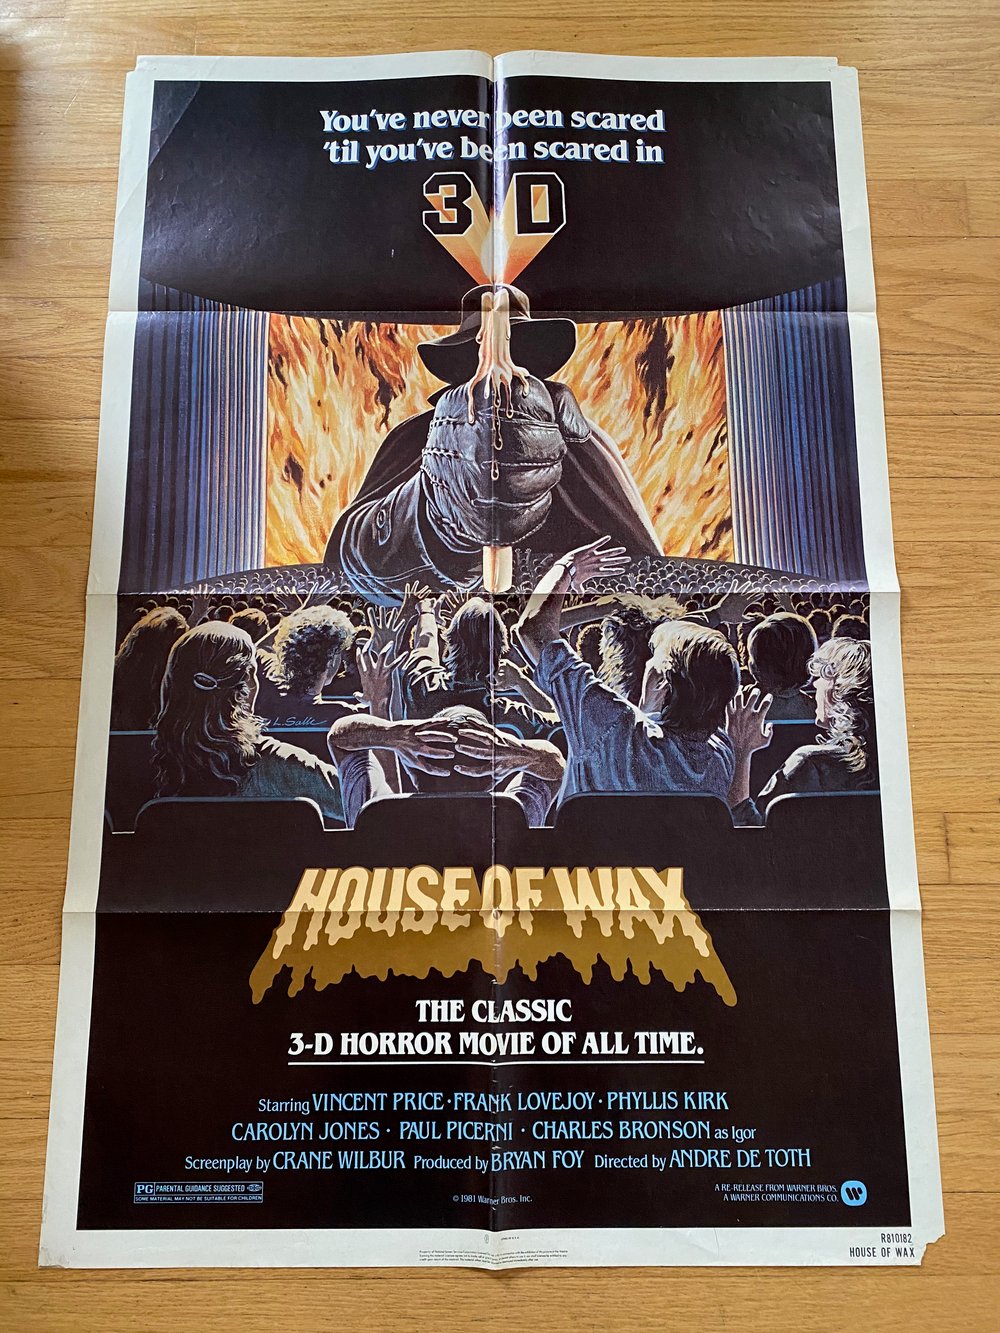 1953 HOUSE OF WAX Original 1981 Re Release U.S. One Sheet Movie Poster